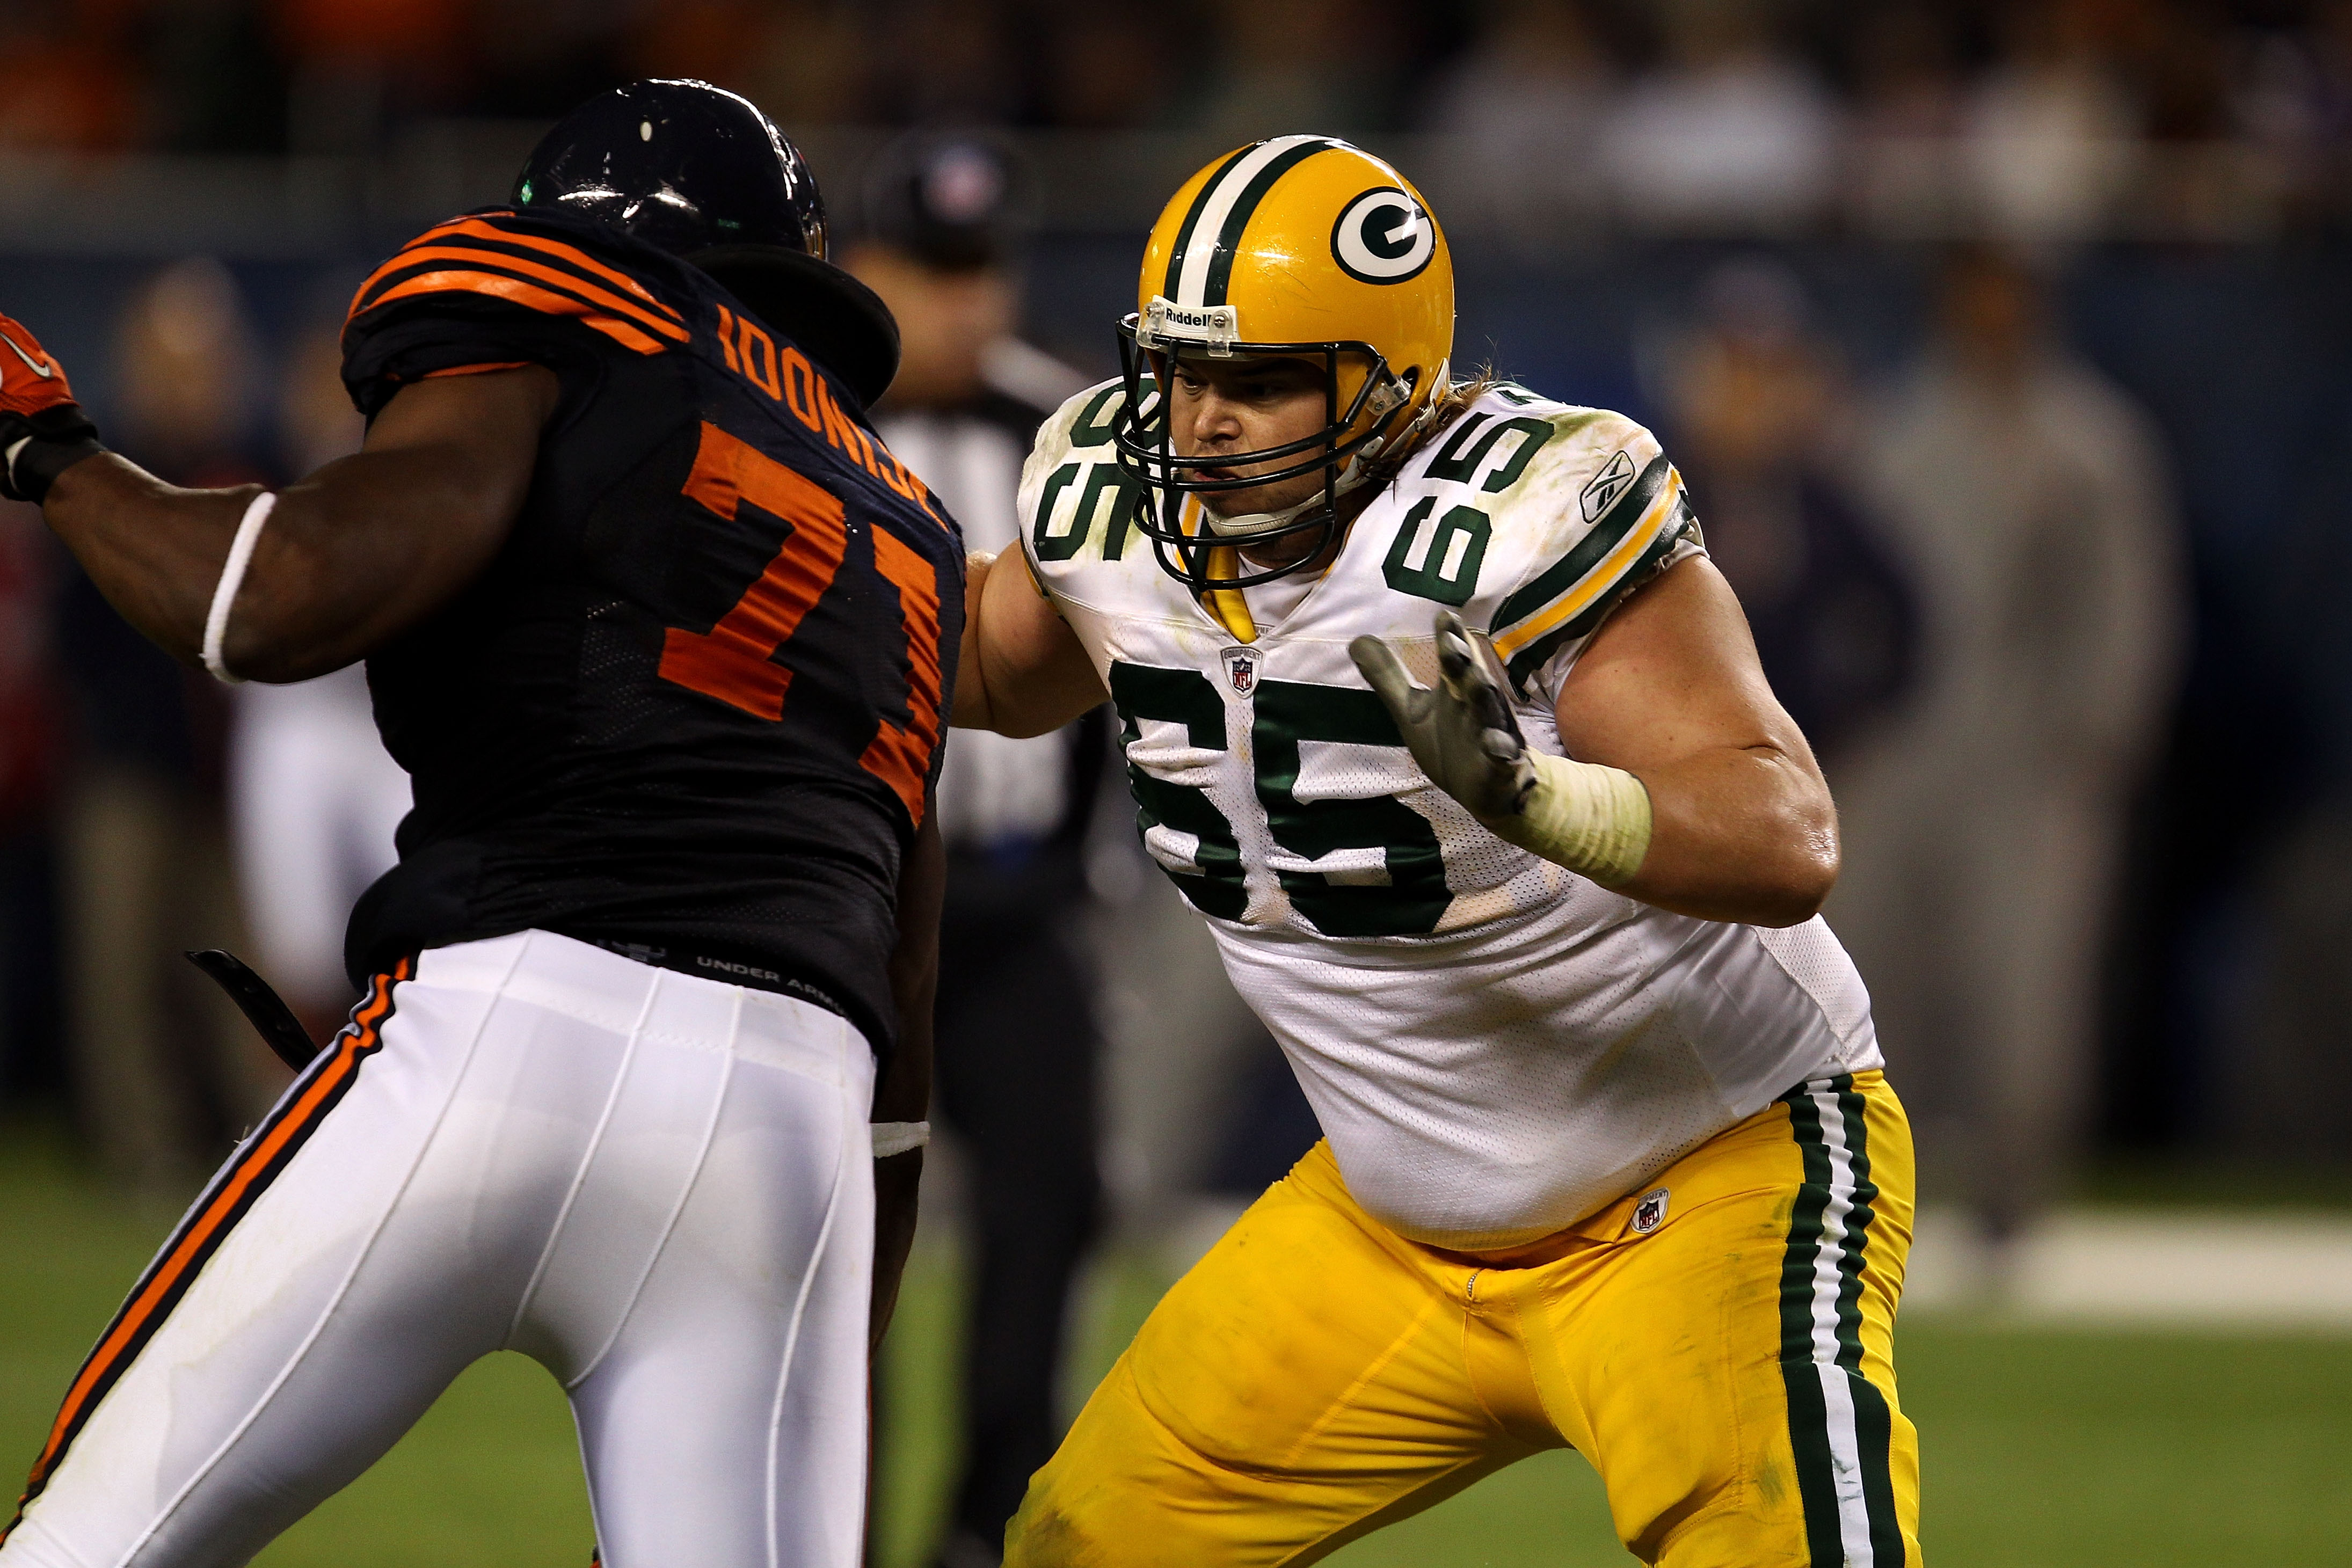 CHICAGO - SEPTEMBER 27:  Offensive guard Mark Tauscher #65 of the Green Bay Packers blocks against the Chicago Bears at Soldier Field on September 27, 2010 in Chicago, Illinois.  (Photo by Jonathan Daniel/Getty Images)